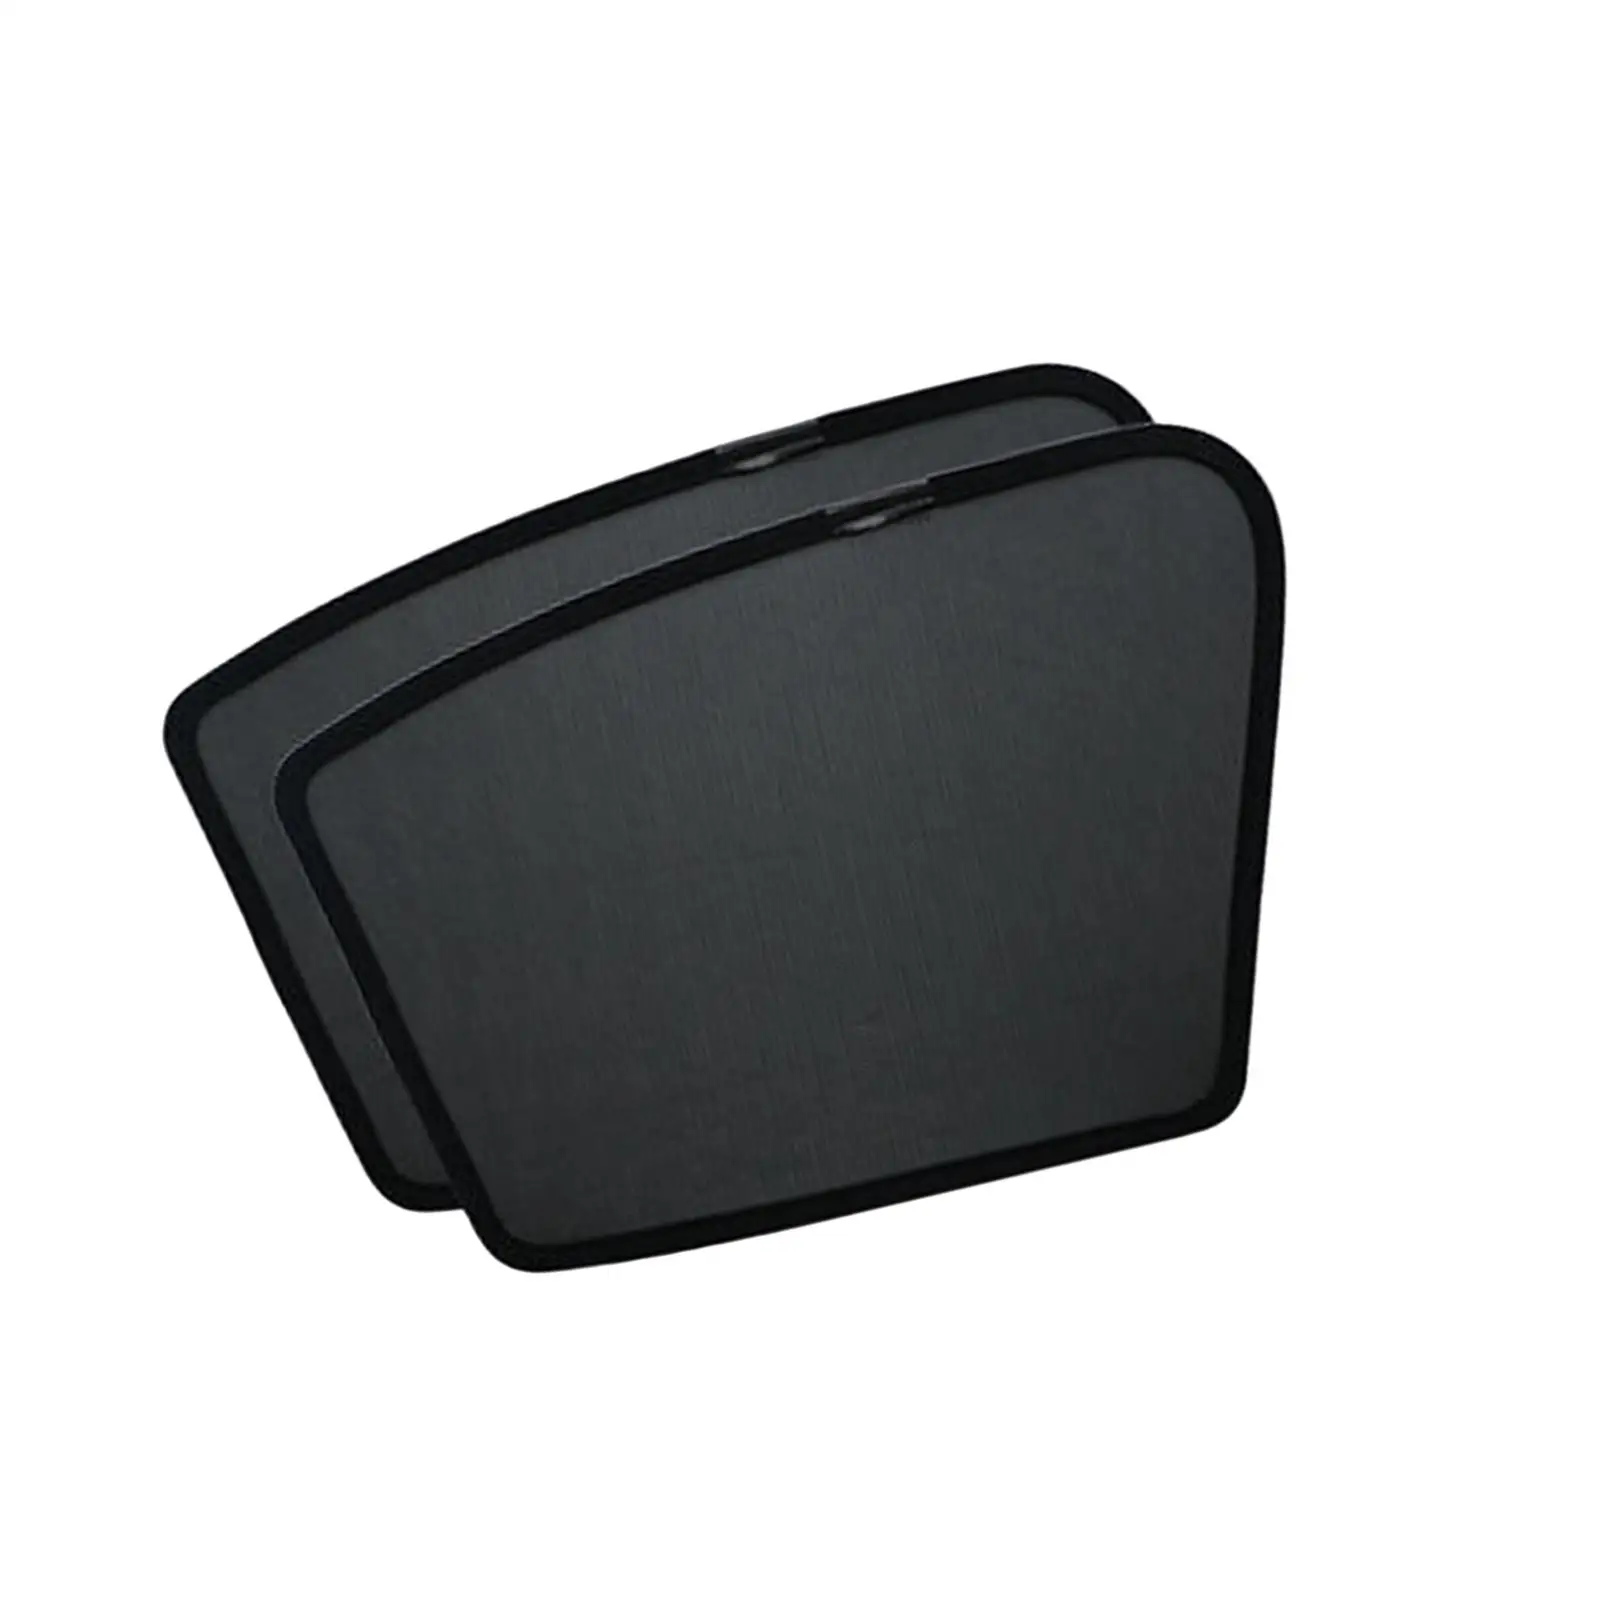 Car Window Sun Shades Keeps Vehicle Cool Protection Accessories Block Light Window Sunshades for Byd Atto 3 Yuan Plus 2022